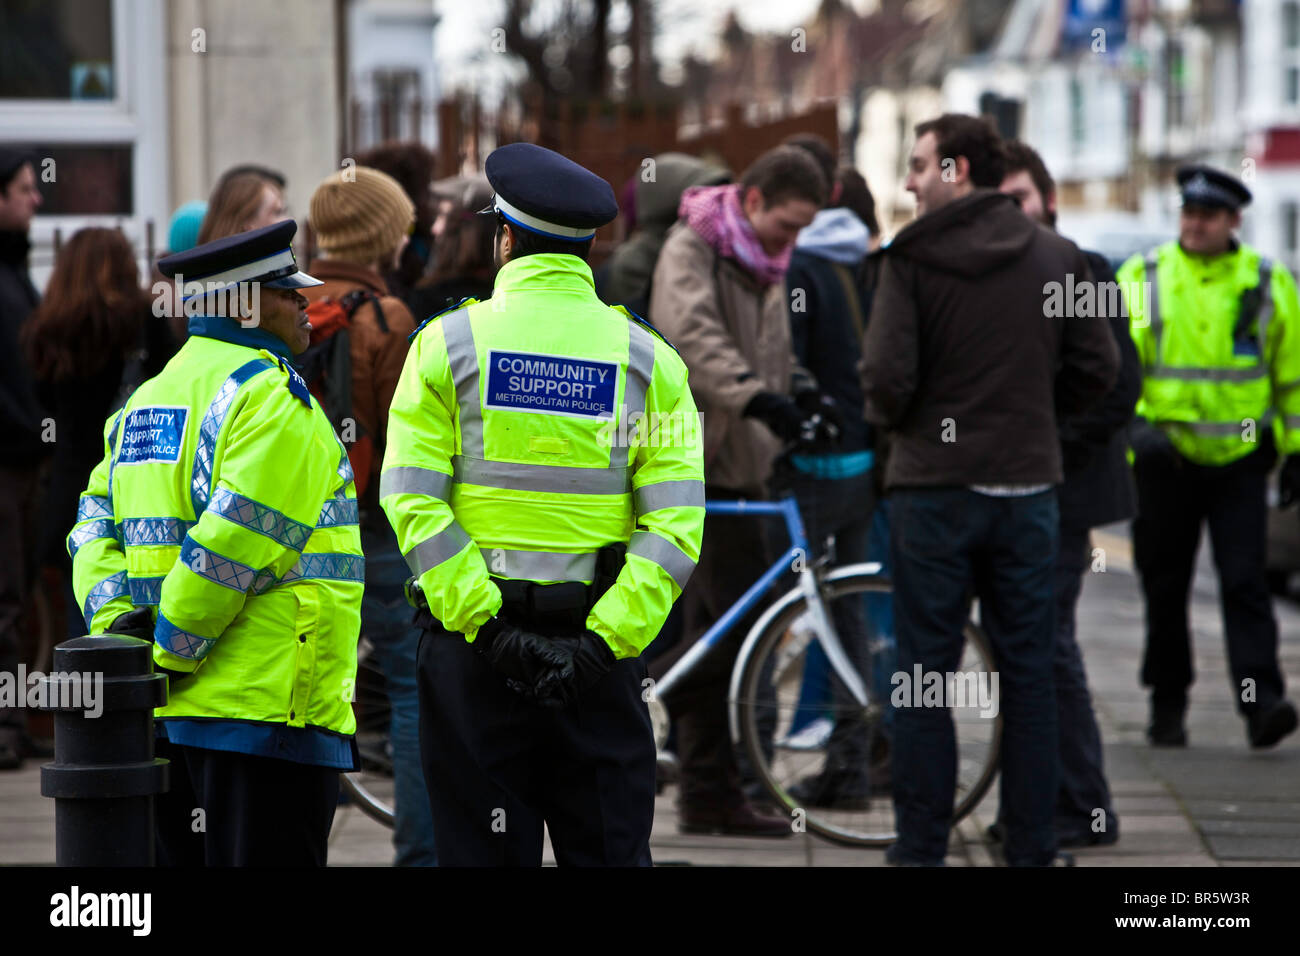 Local police and community support officers policing a peaceful demonstration Hackney, London. Stock Photo